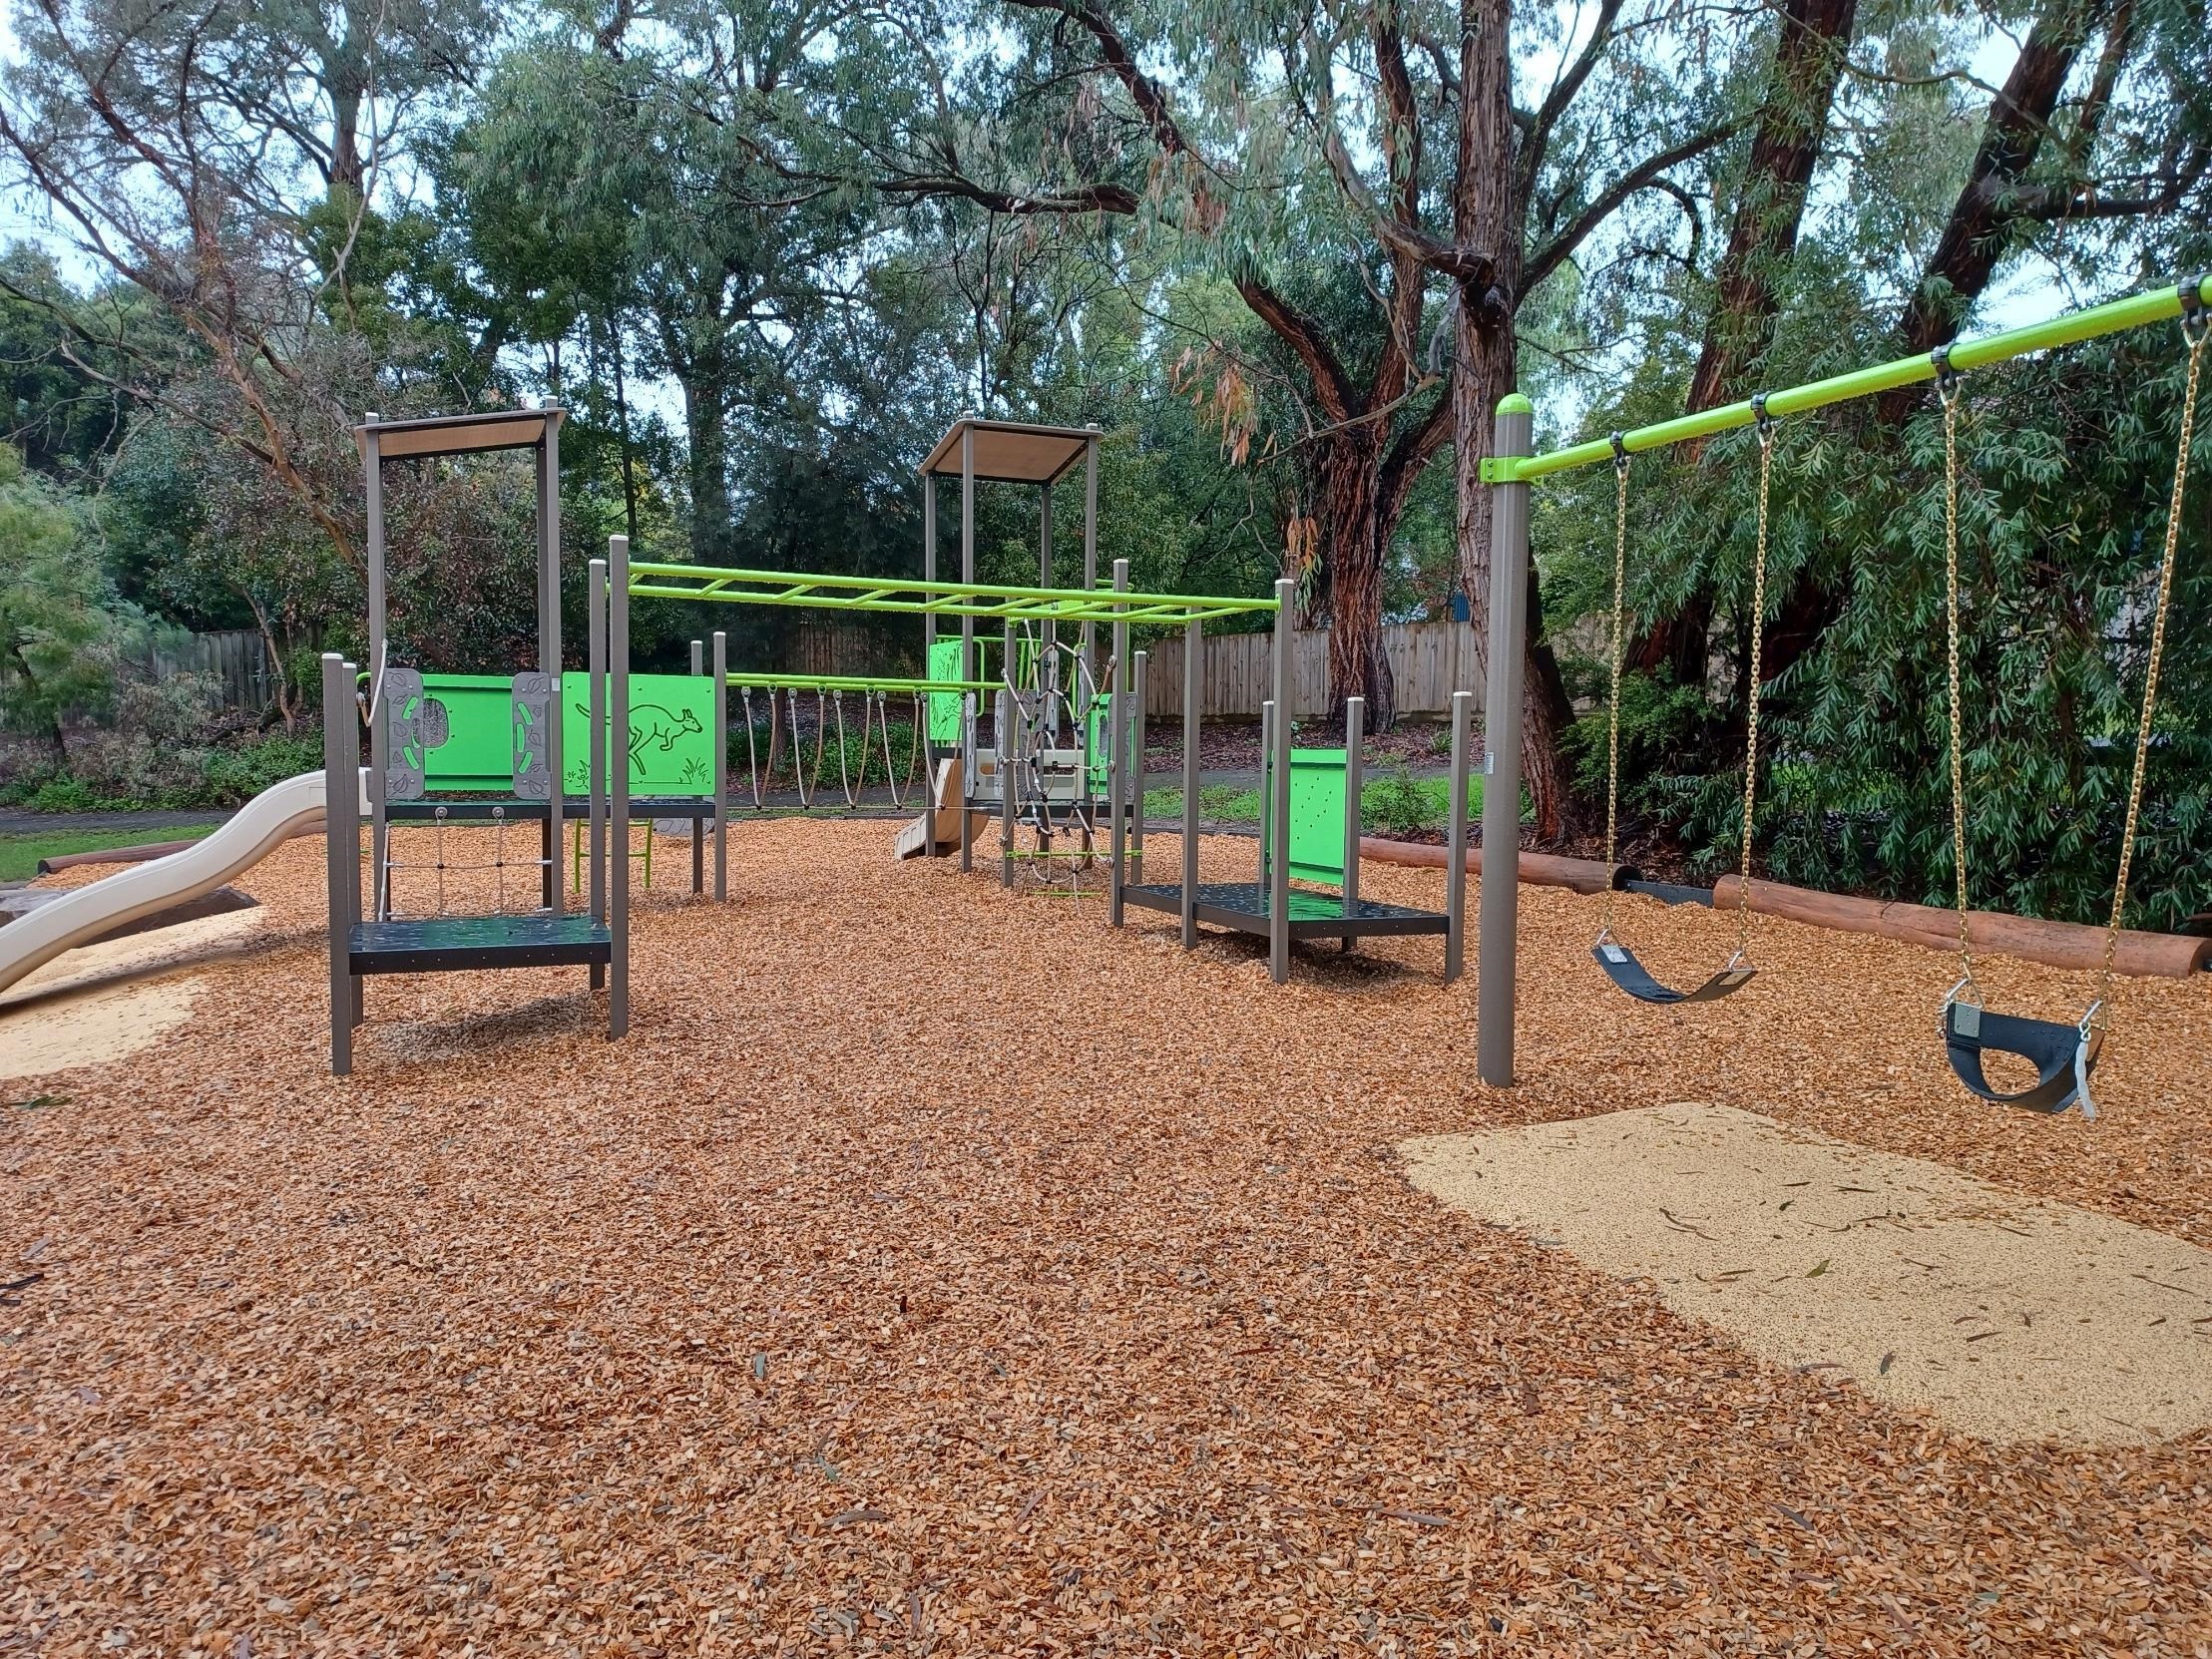 The new San Martin playspace includes swings, play equipment and slide